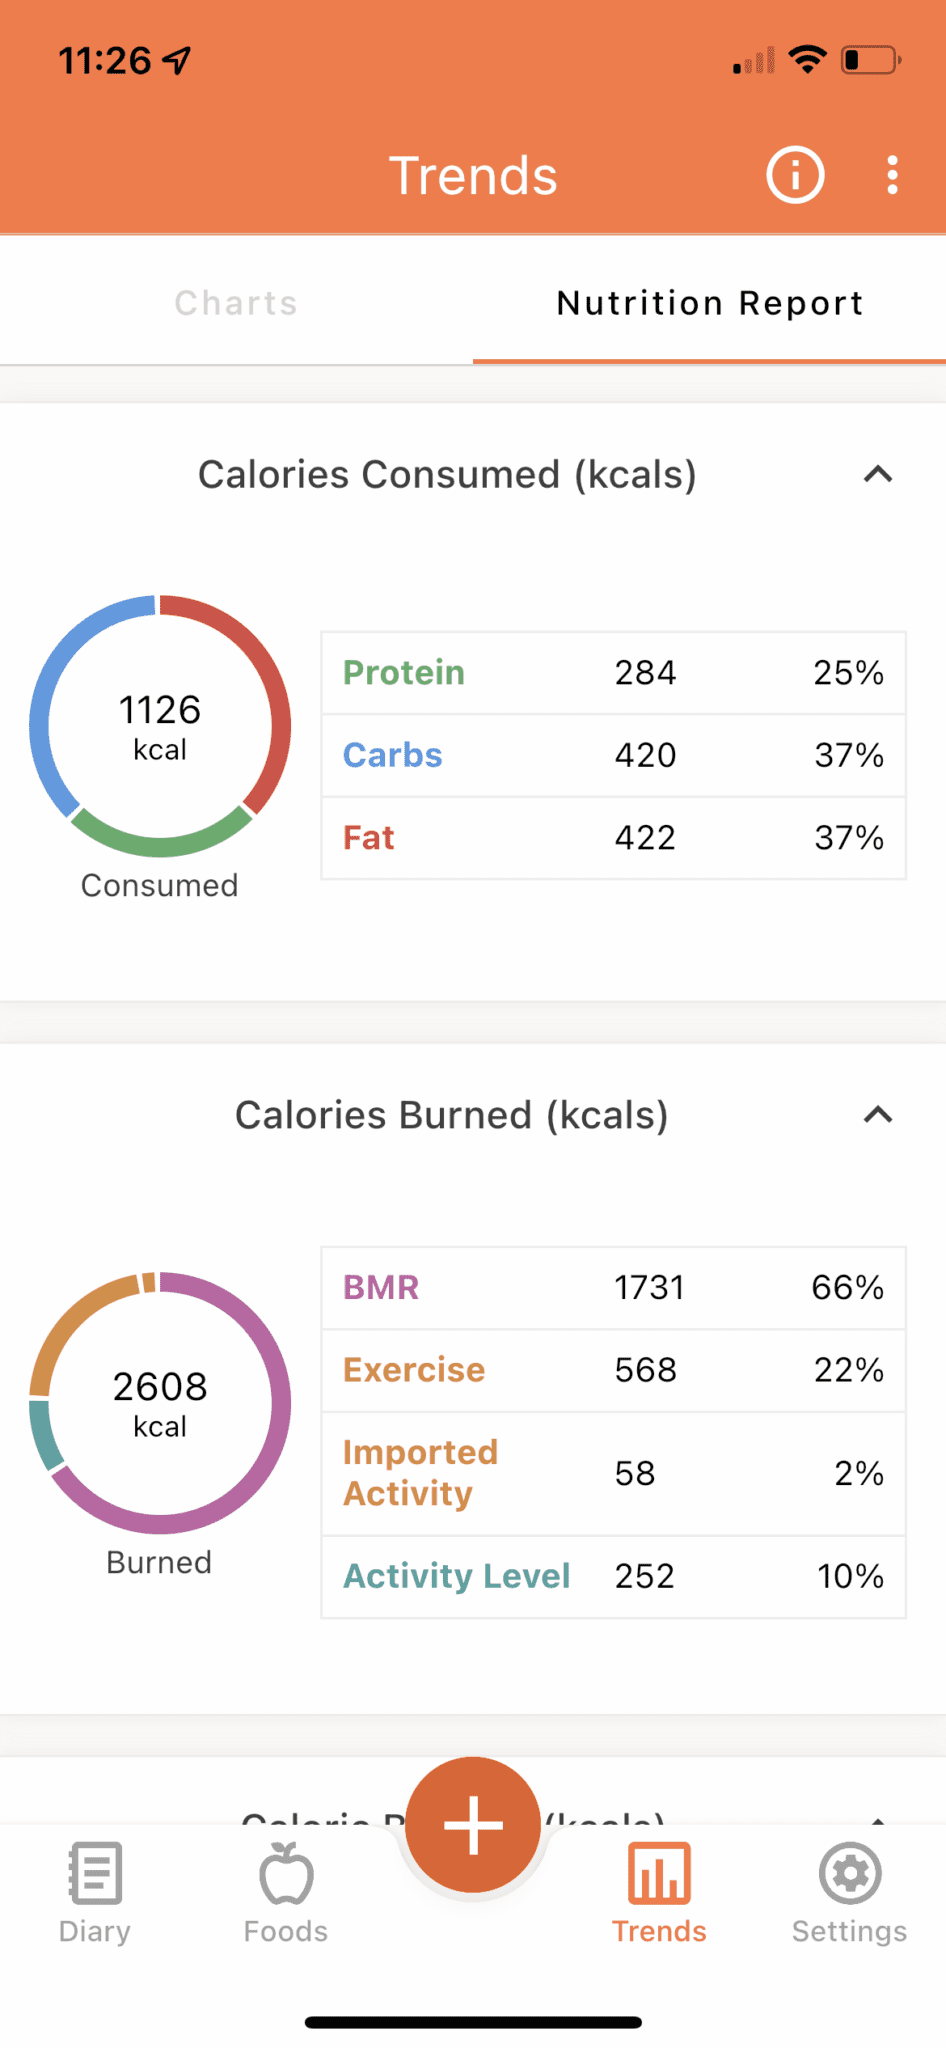 Old nutrition report.